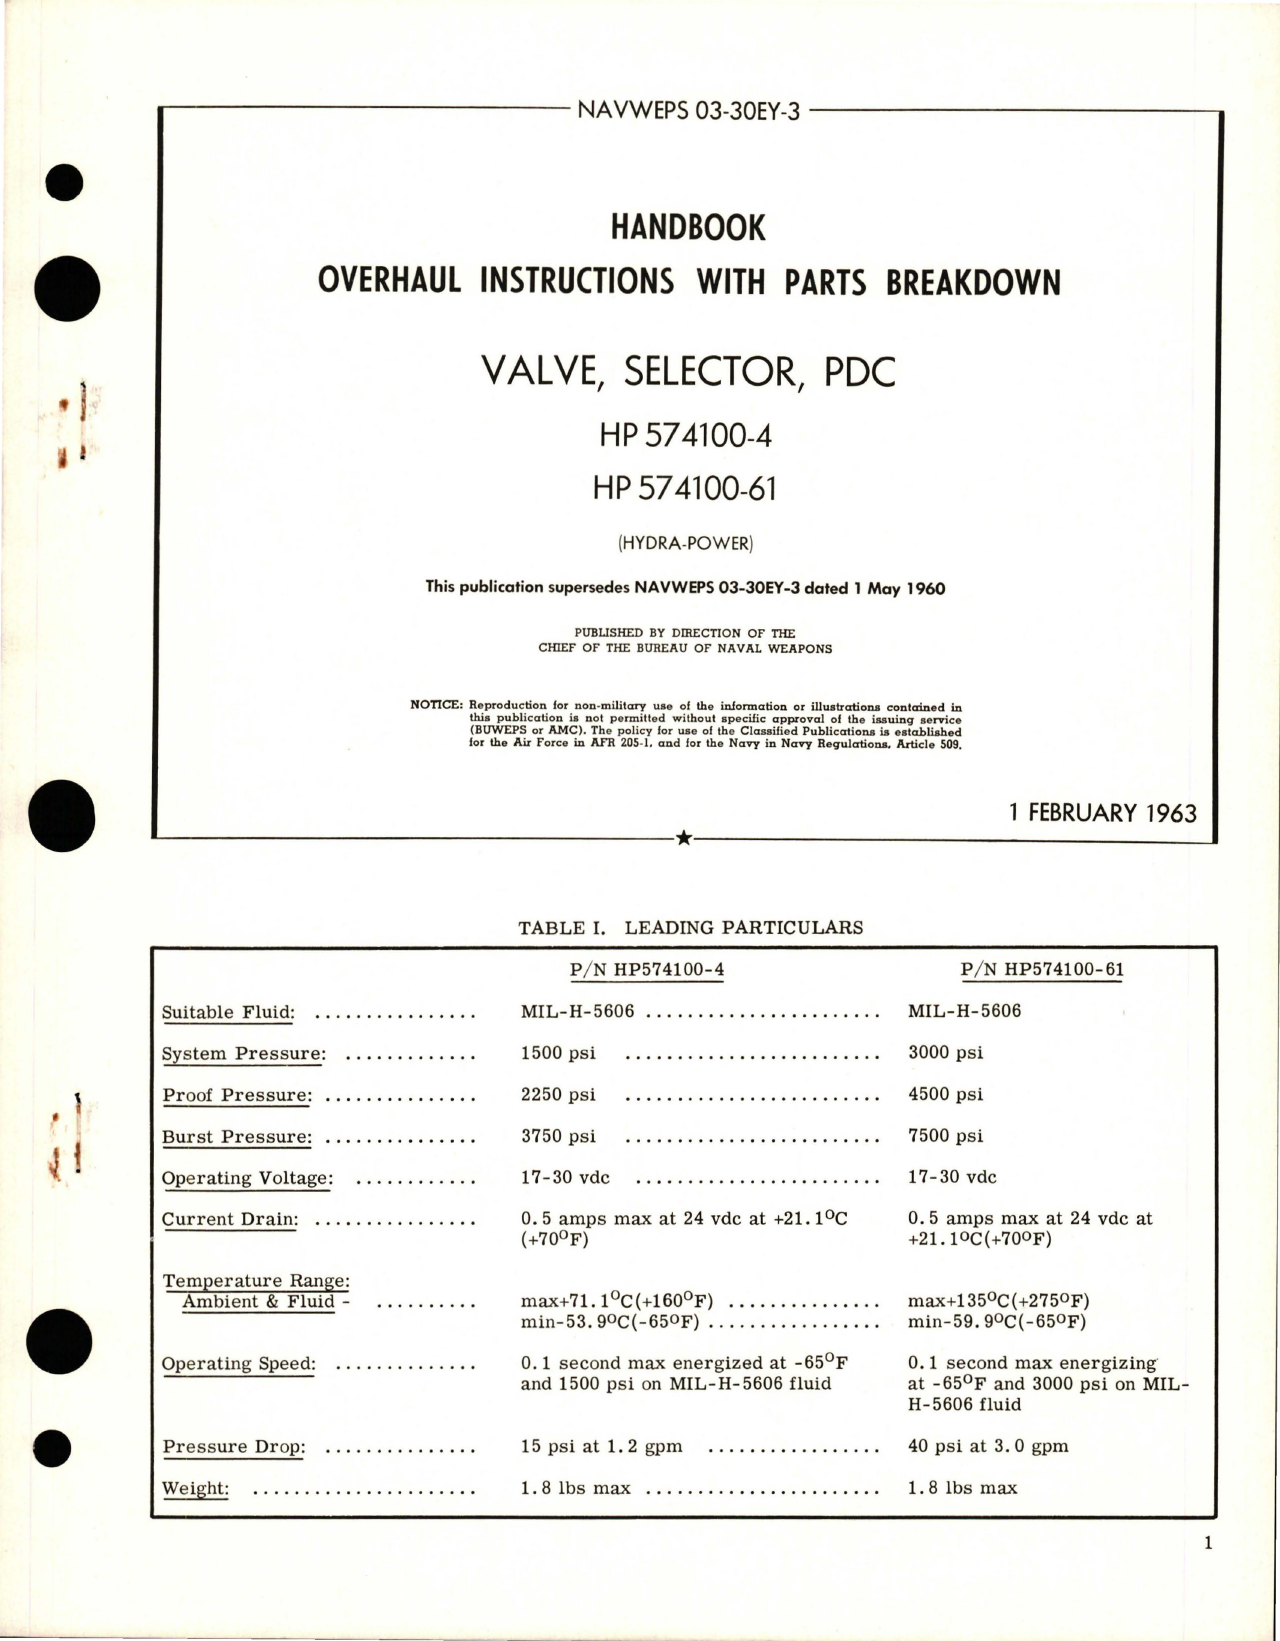 Sample page 1 from AirCorps Library document: Overhaul Instructions with Parts Breakdown for PDC Selector Valve - HP574100-4, HP574100-61